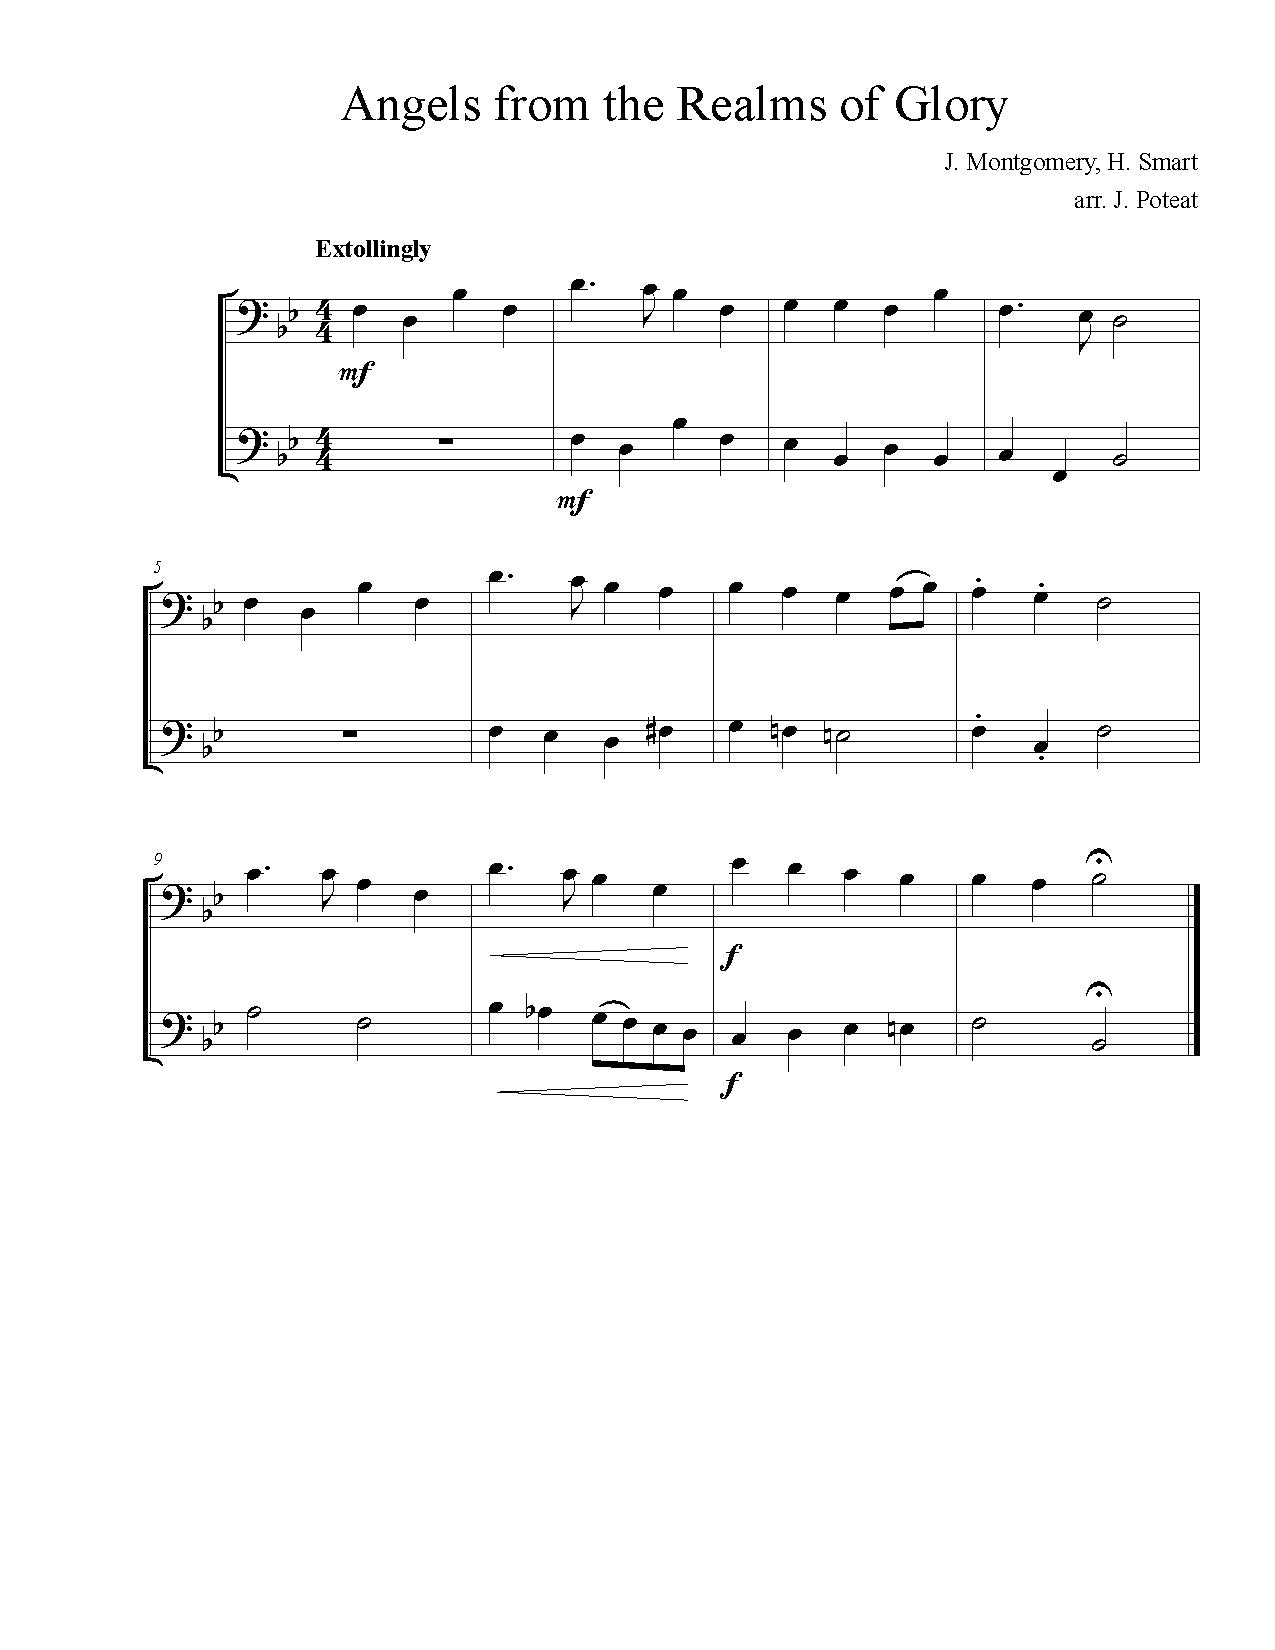 Christmas Duets BASS CLEF - DOWNLOAD